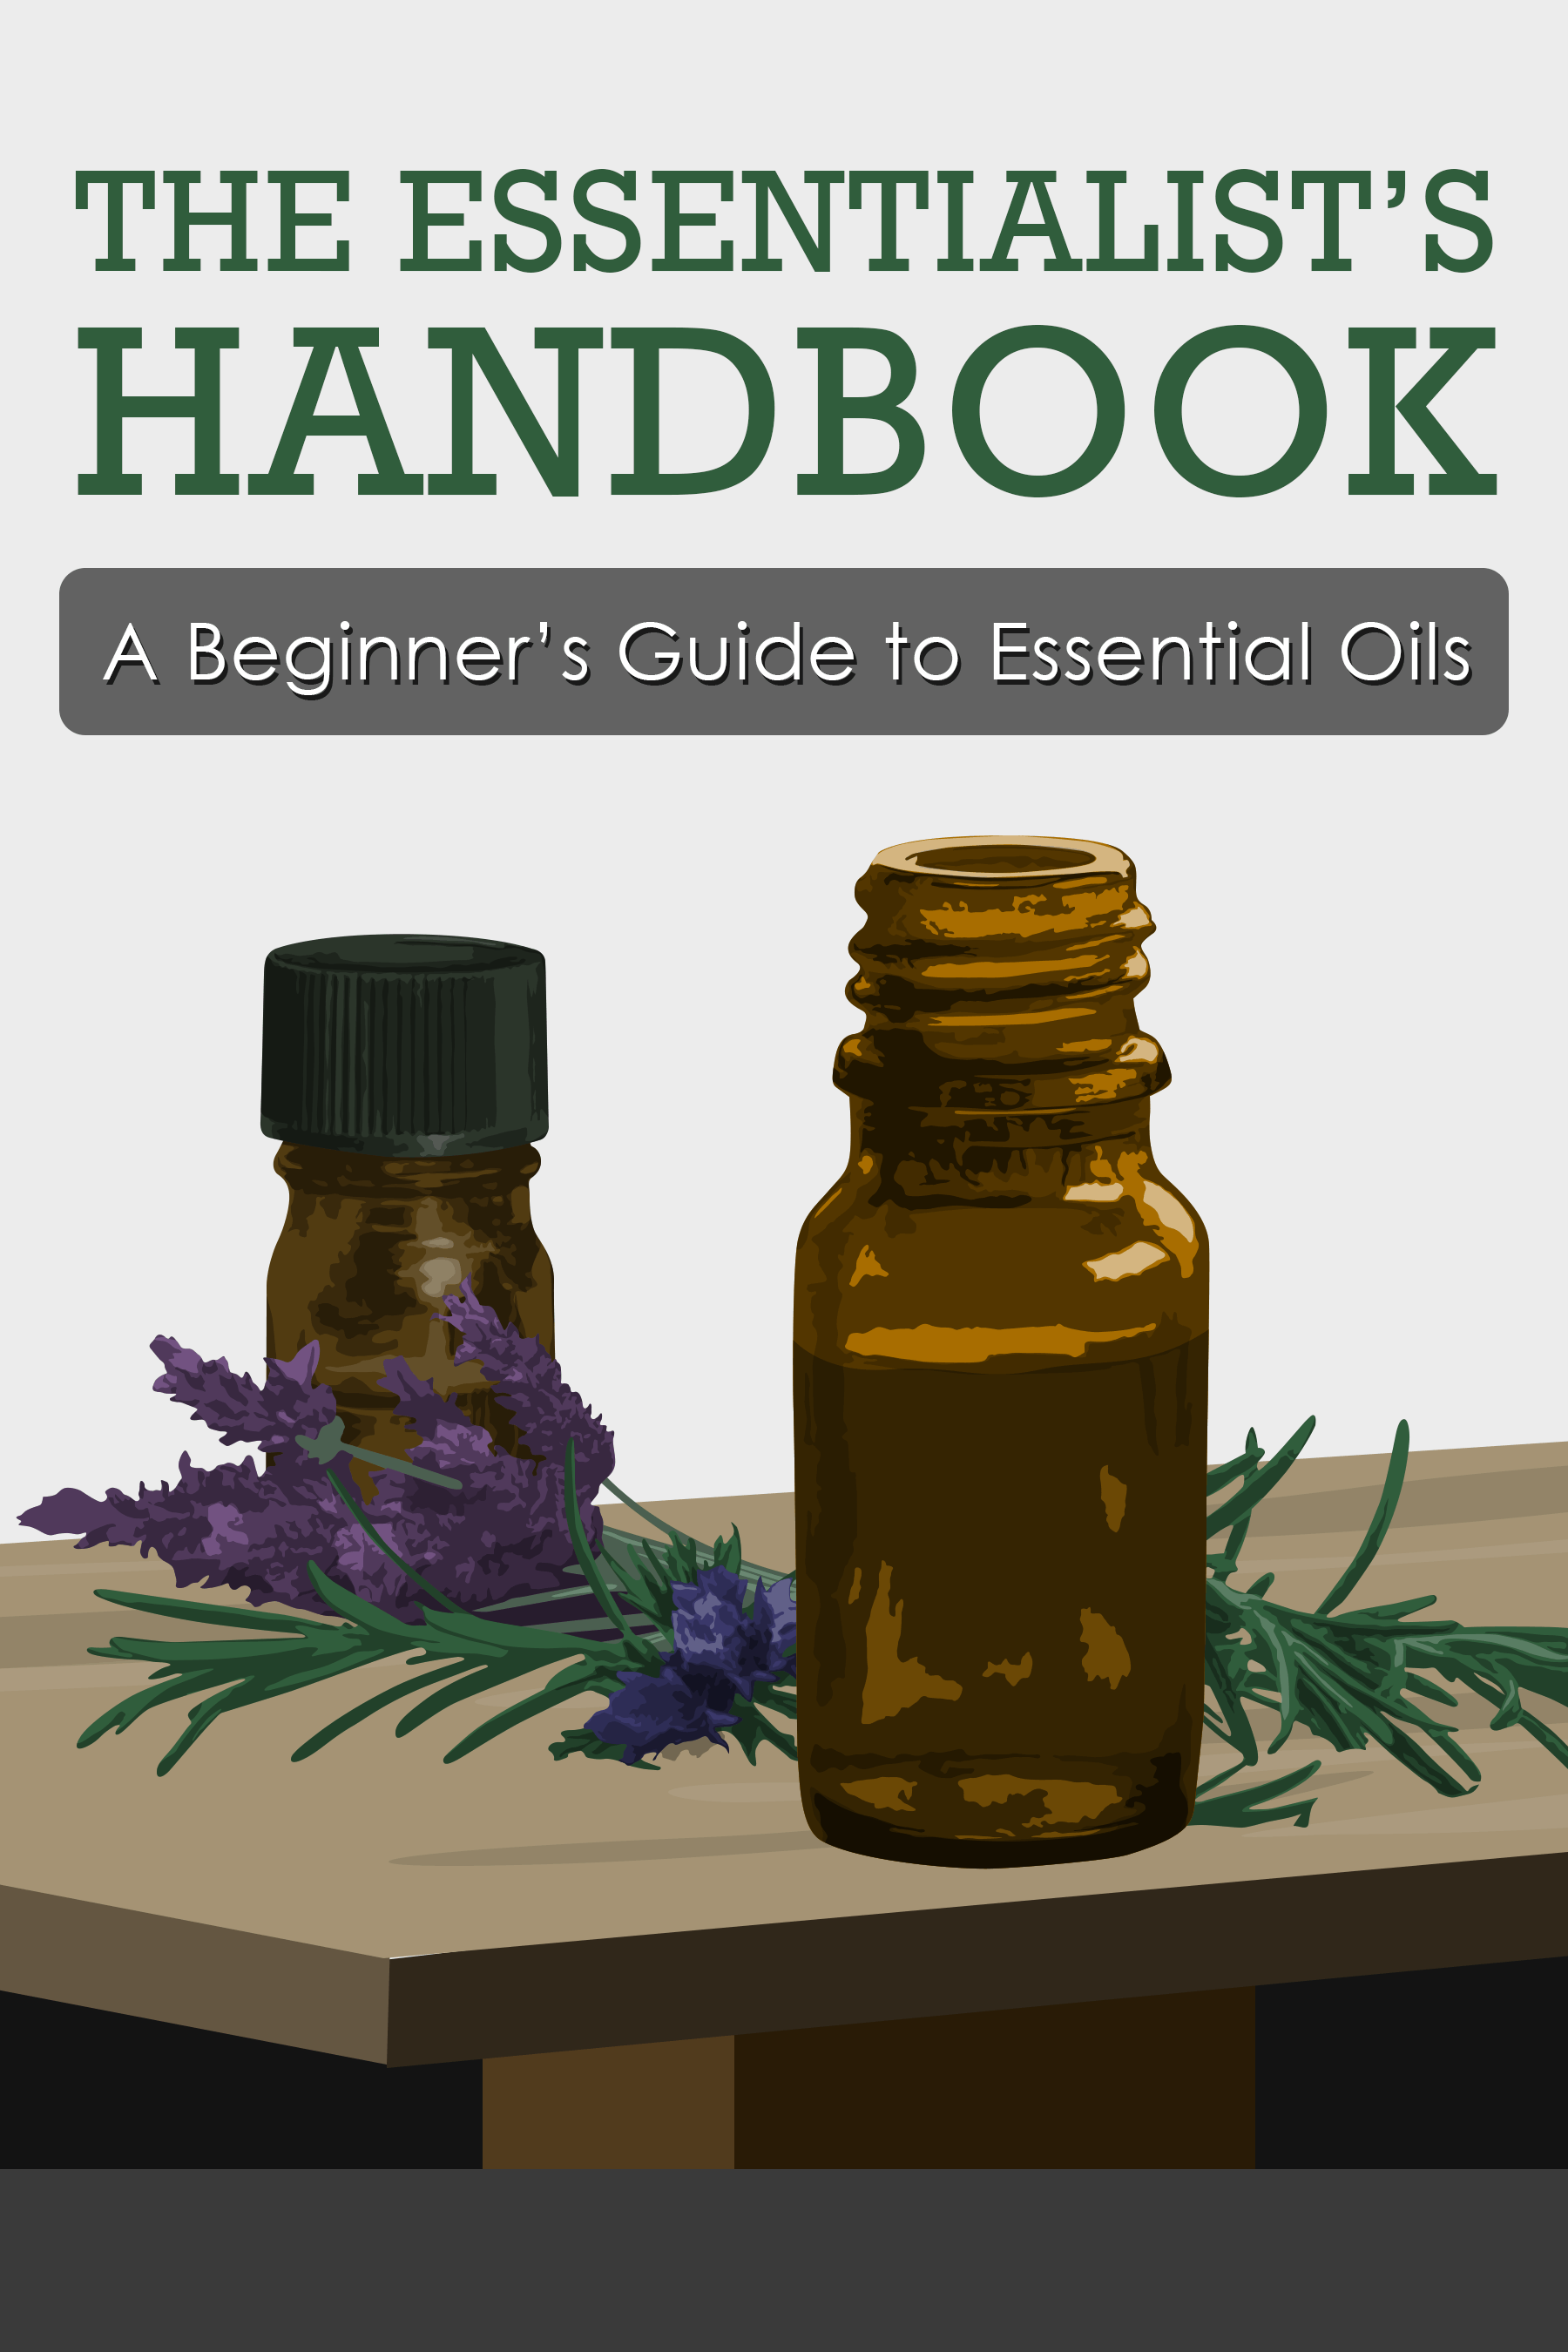 learn how to safely use essential oils